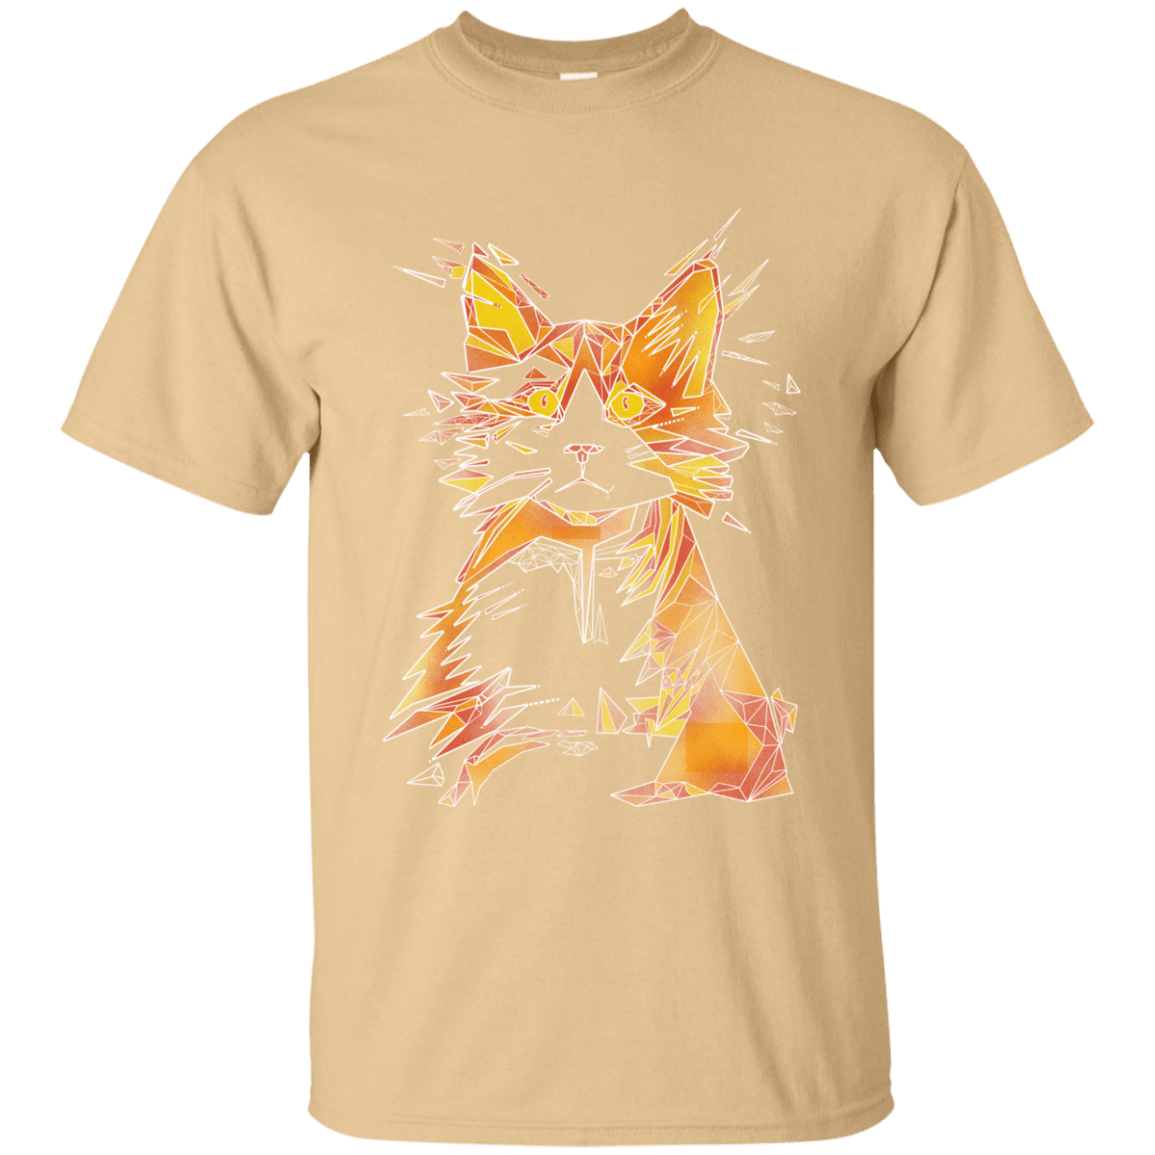 T-Shirts Vegas Gold / S Scattered T-Shirt